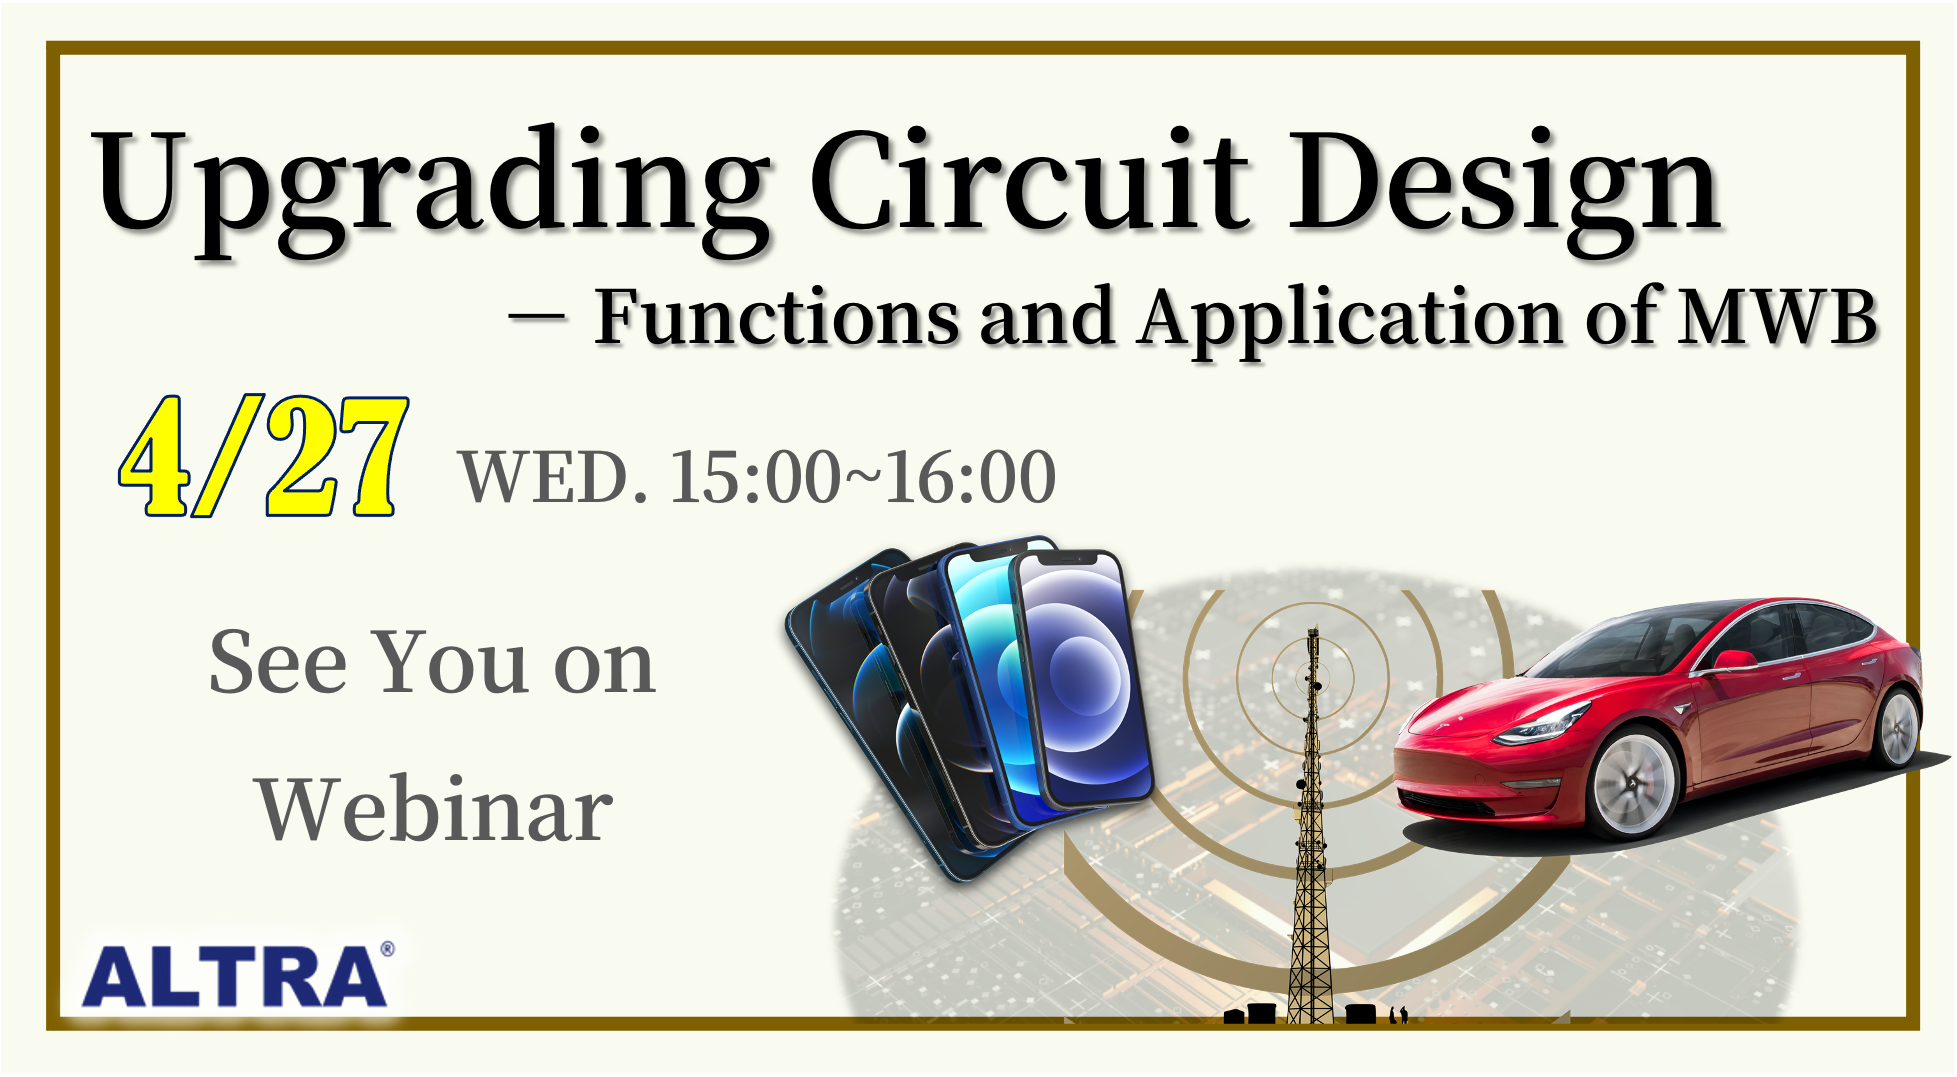 4/27 Webinar: Upgrading Circuit Design - MWB Functions and Application